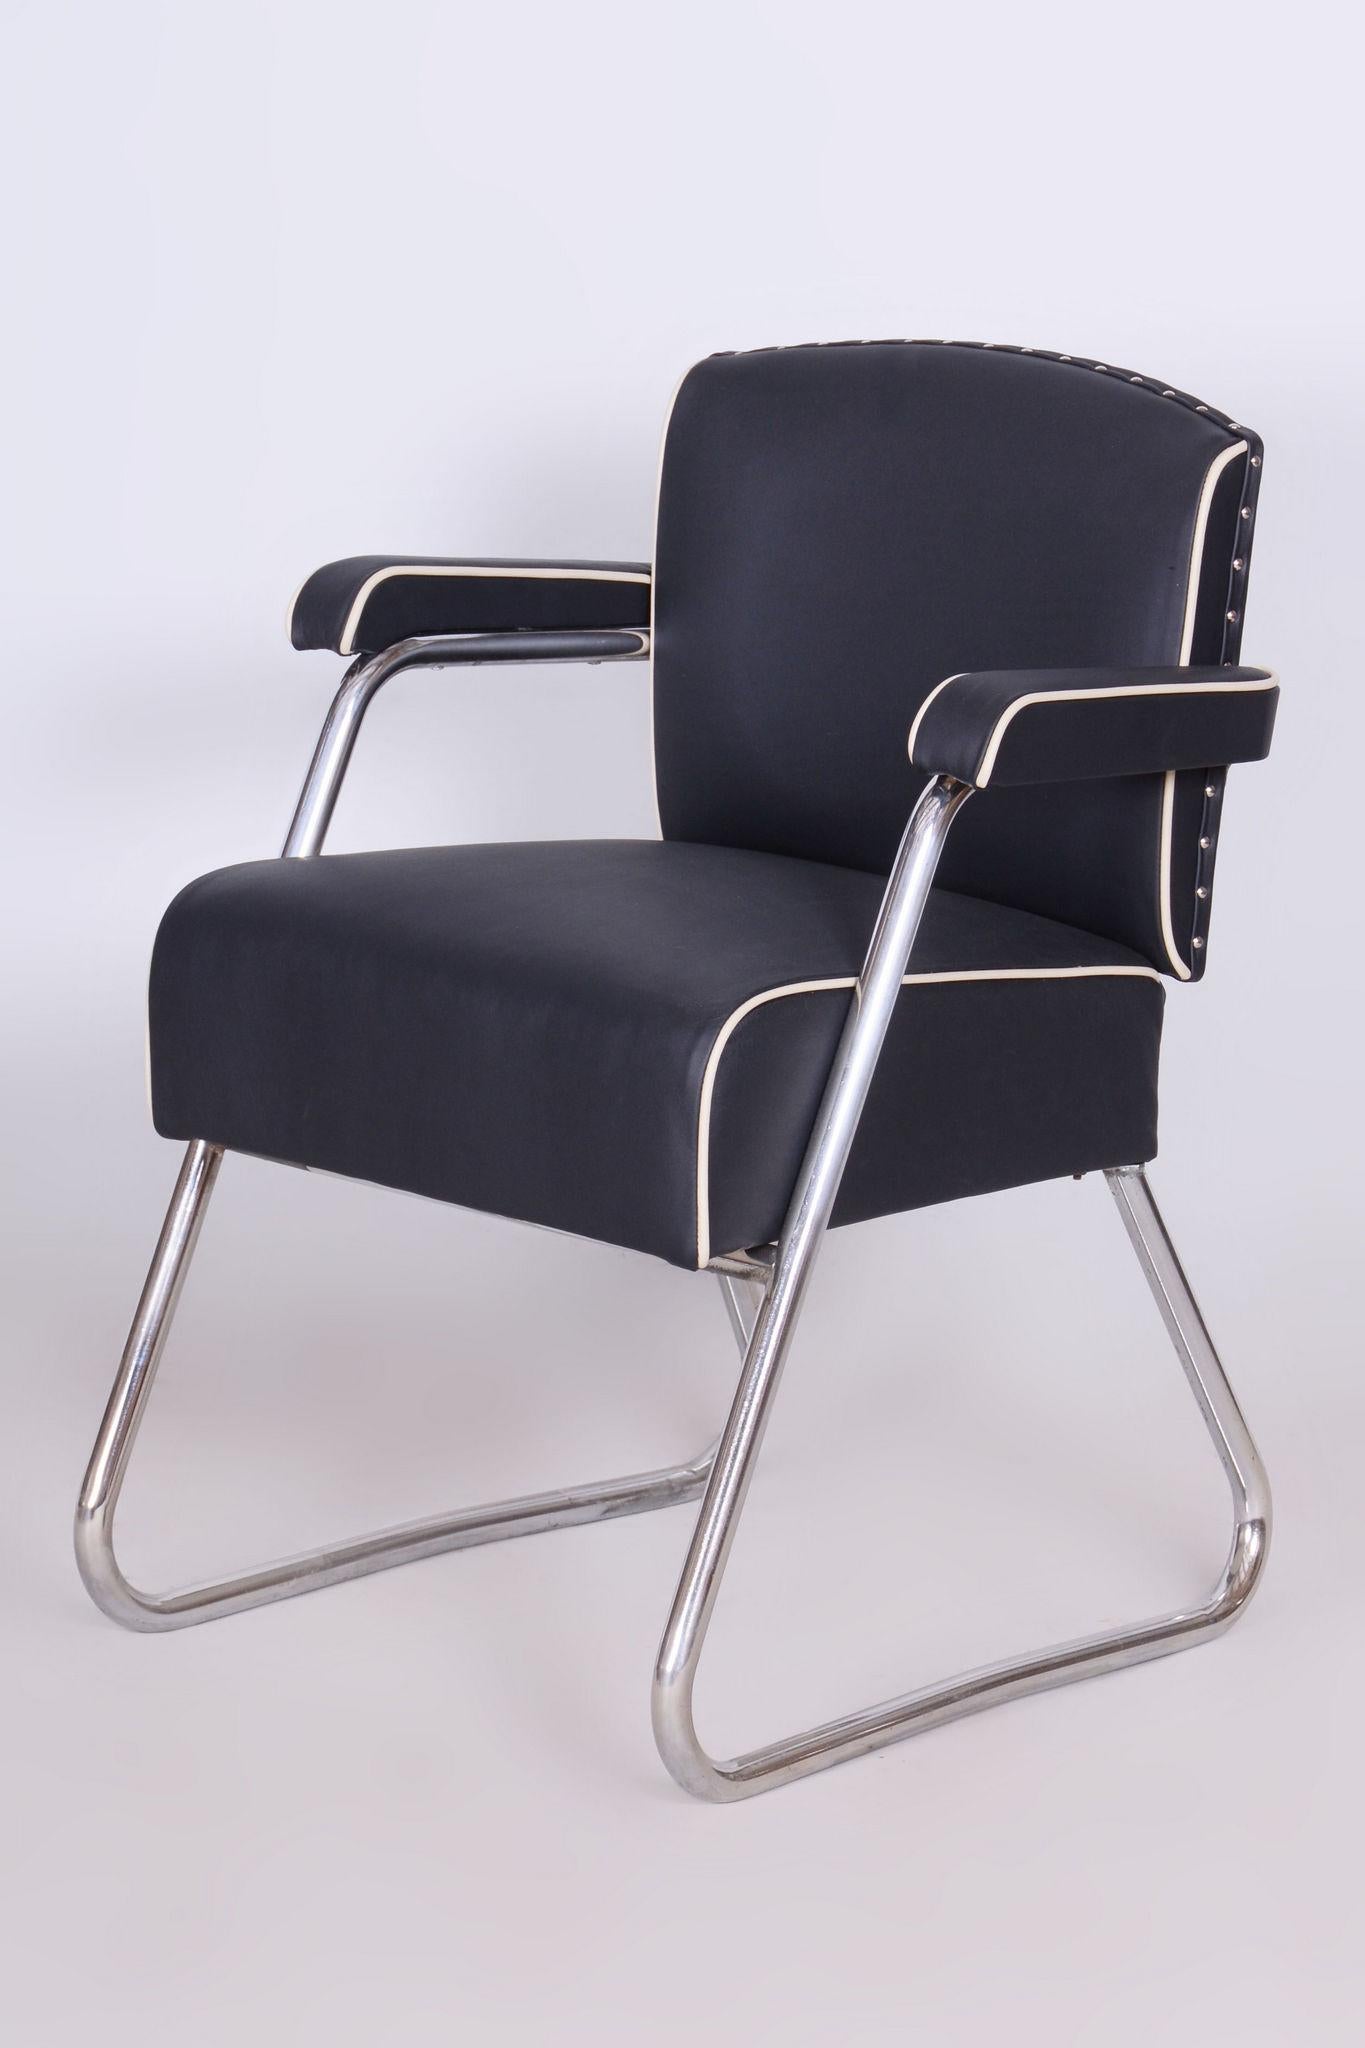 Restored Black Bauhaus Armchair, Mauser, Rohde, Chrome, Leather, Germany, 1930s For Sale 5